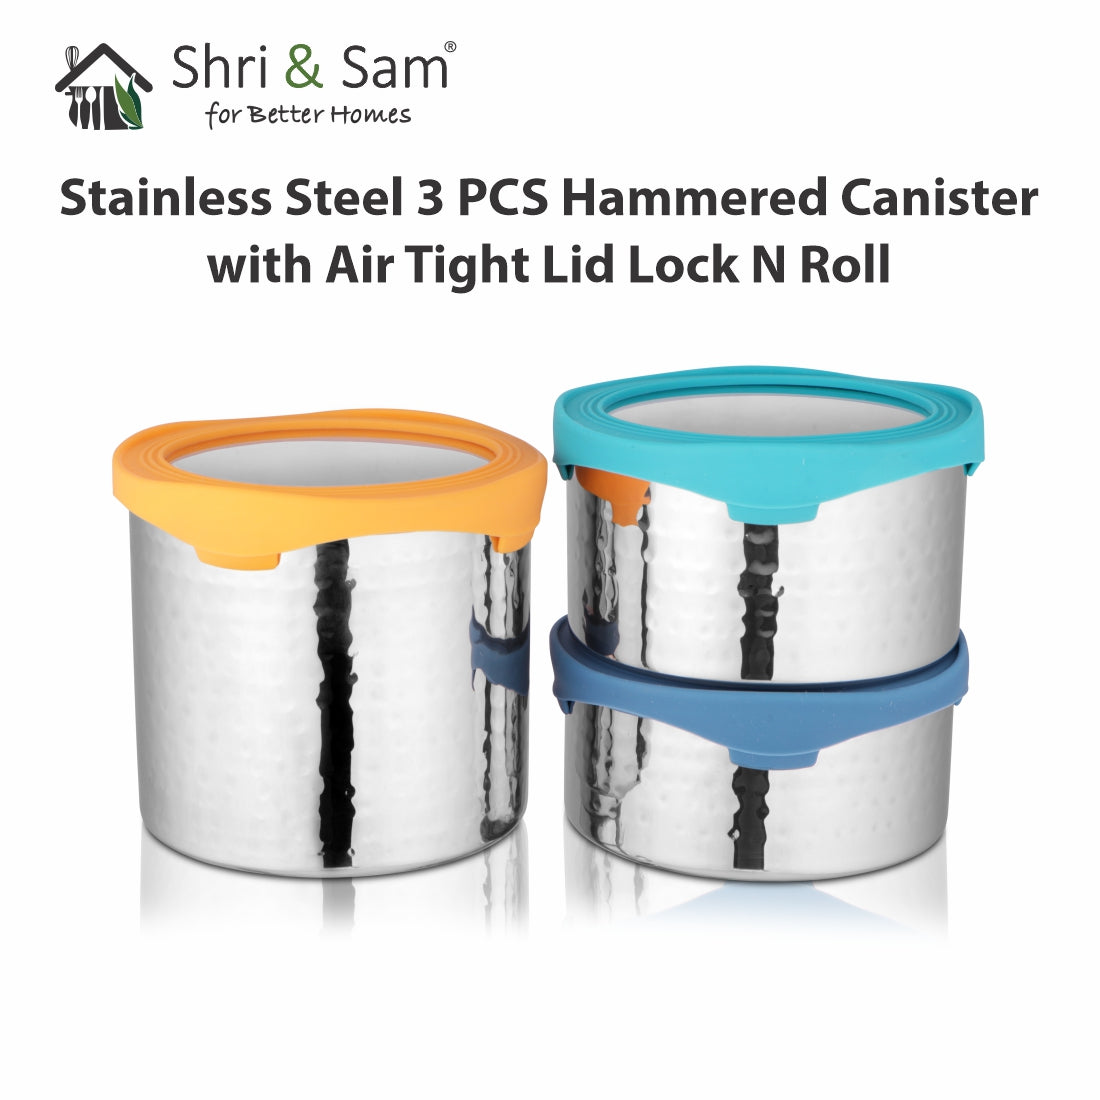 Stainless Steel 3 PCS Hammered Canister with Air Tight Lid Lock N Roll